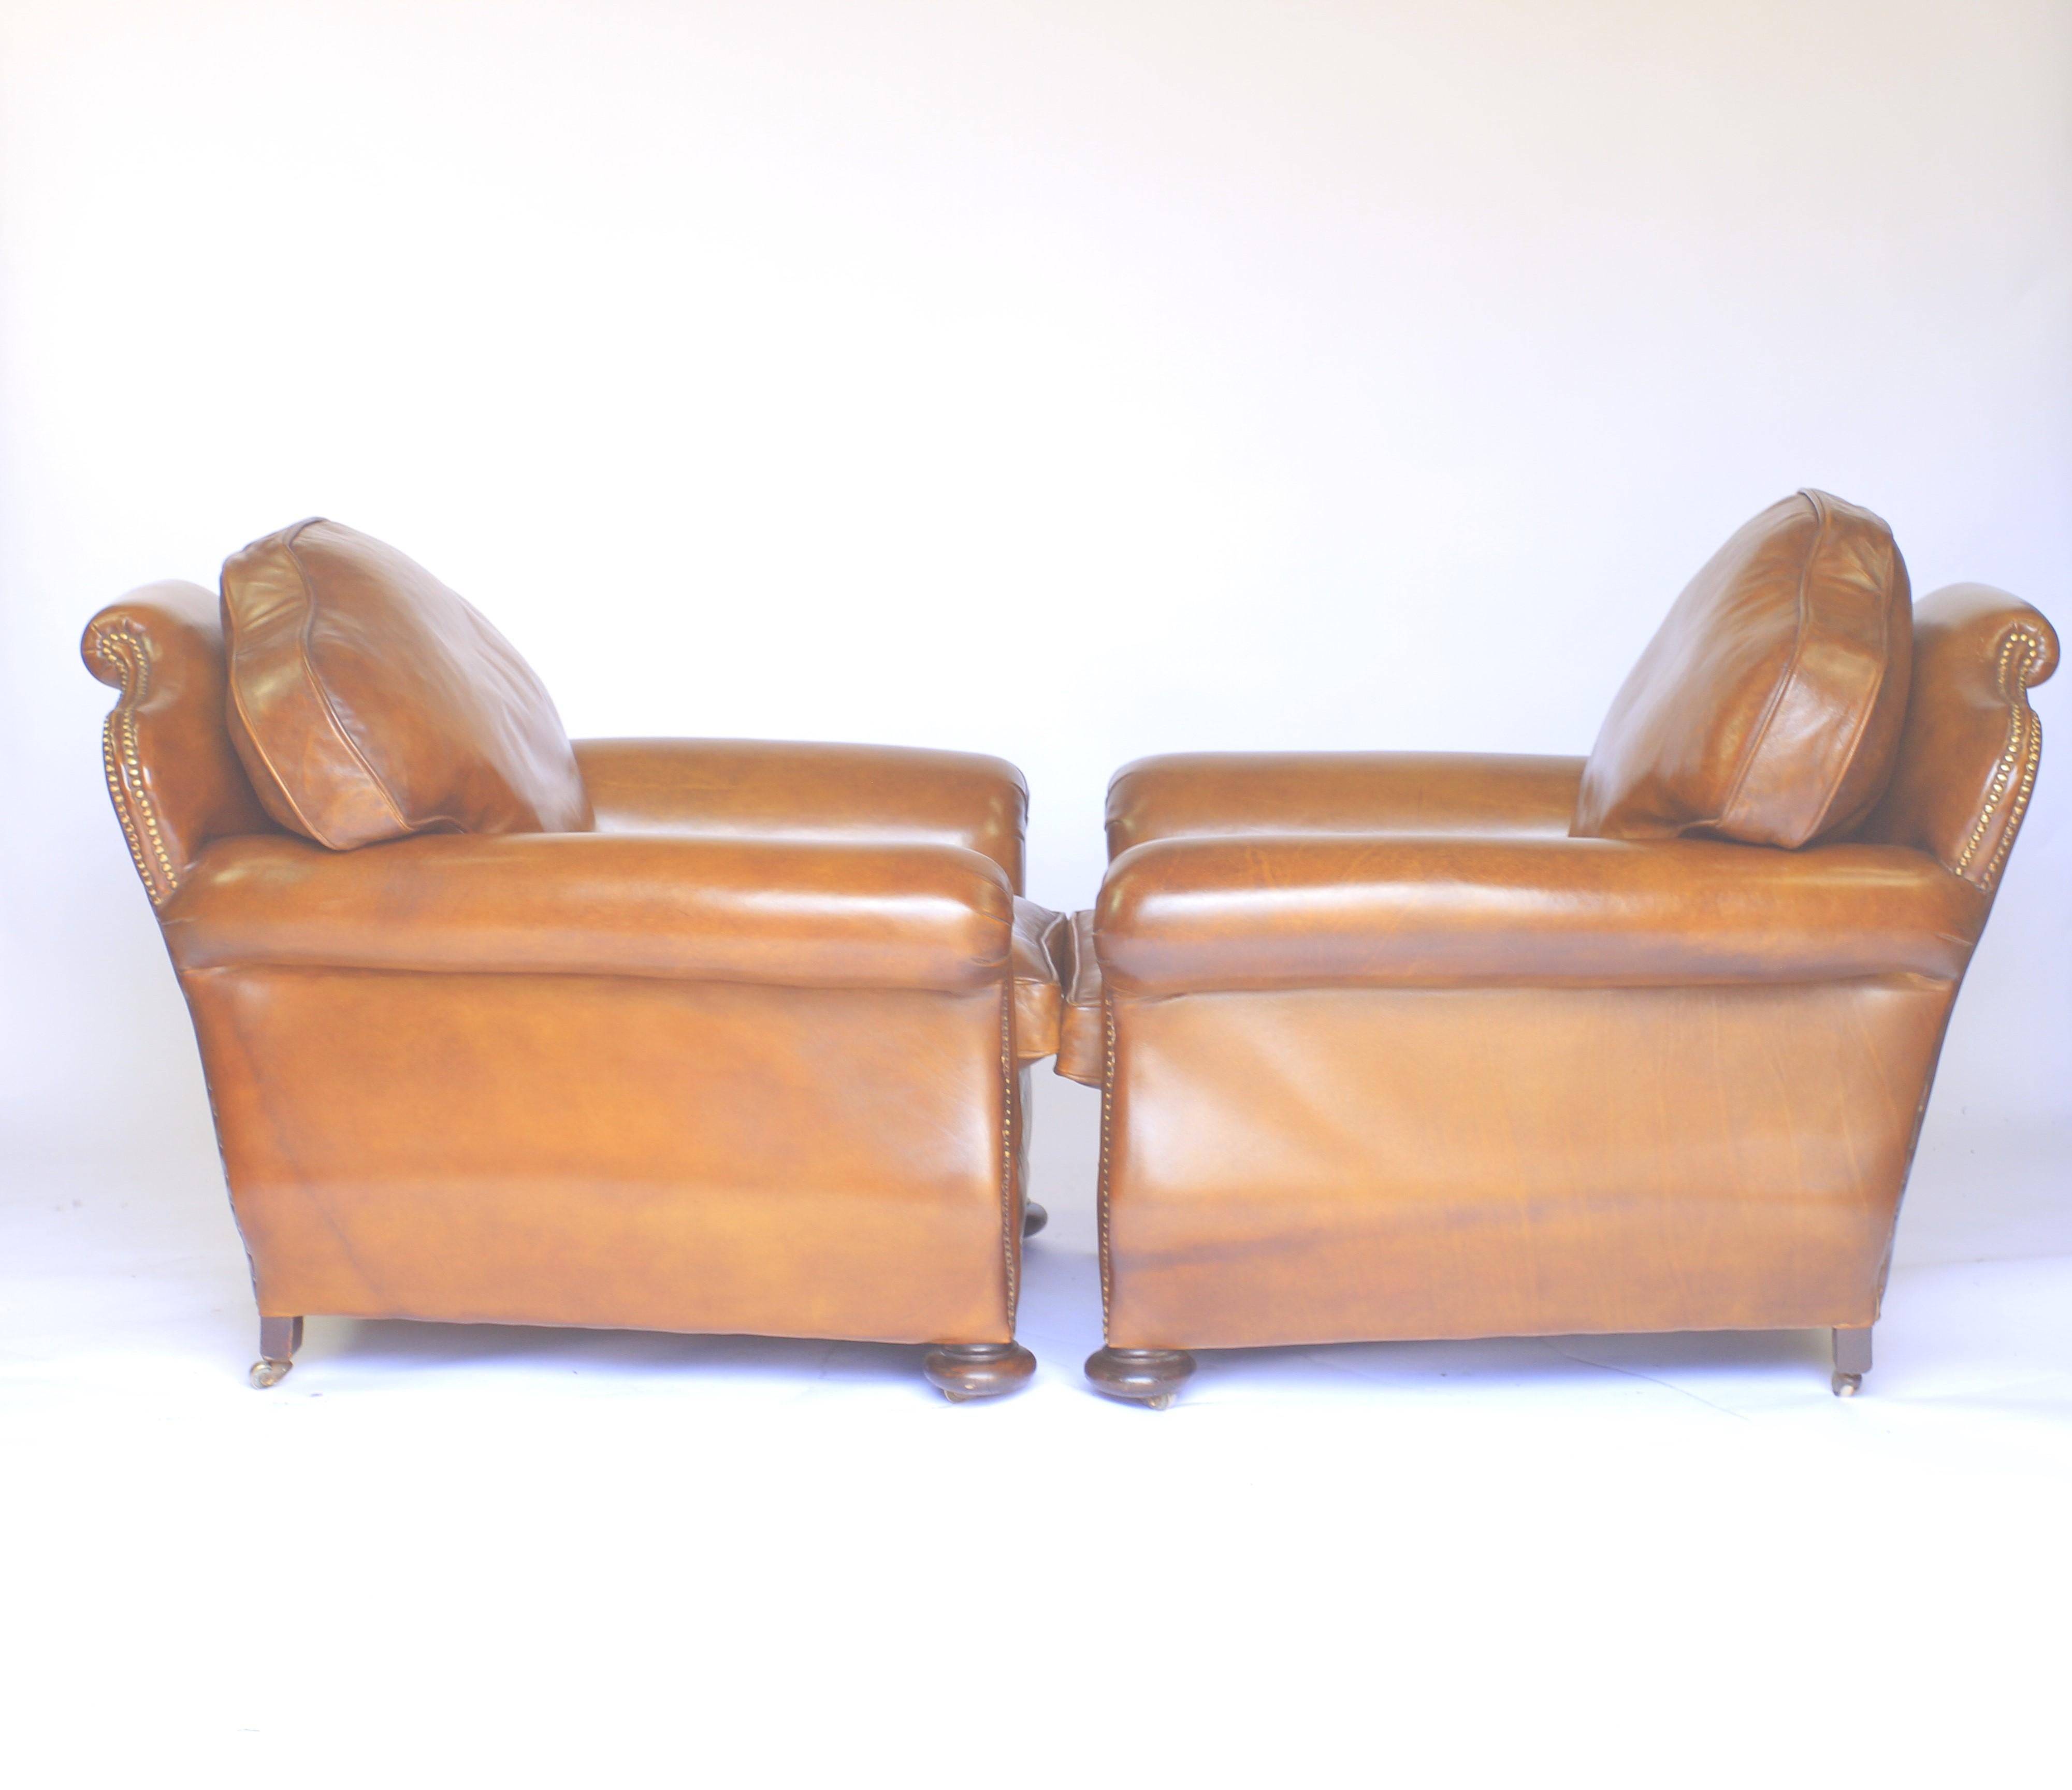 Polished Pair Leather club chairs circa 1920s For Sale